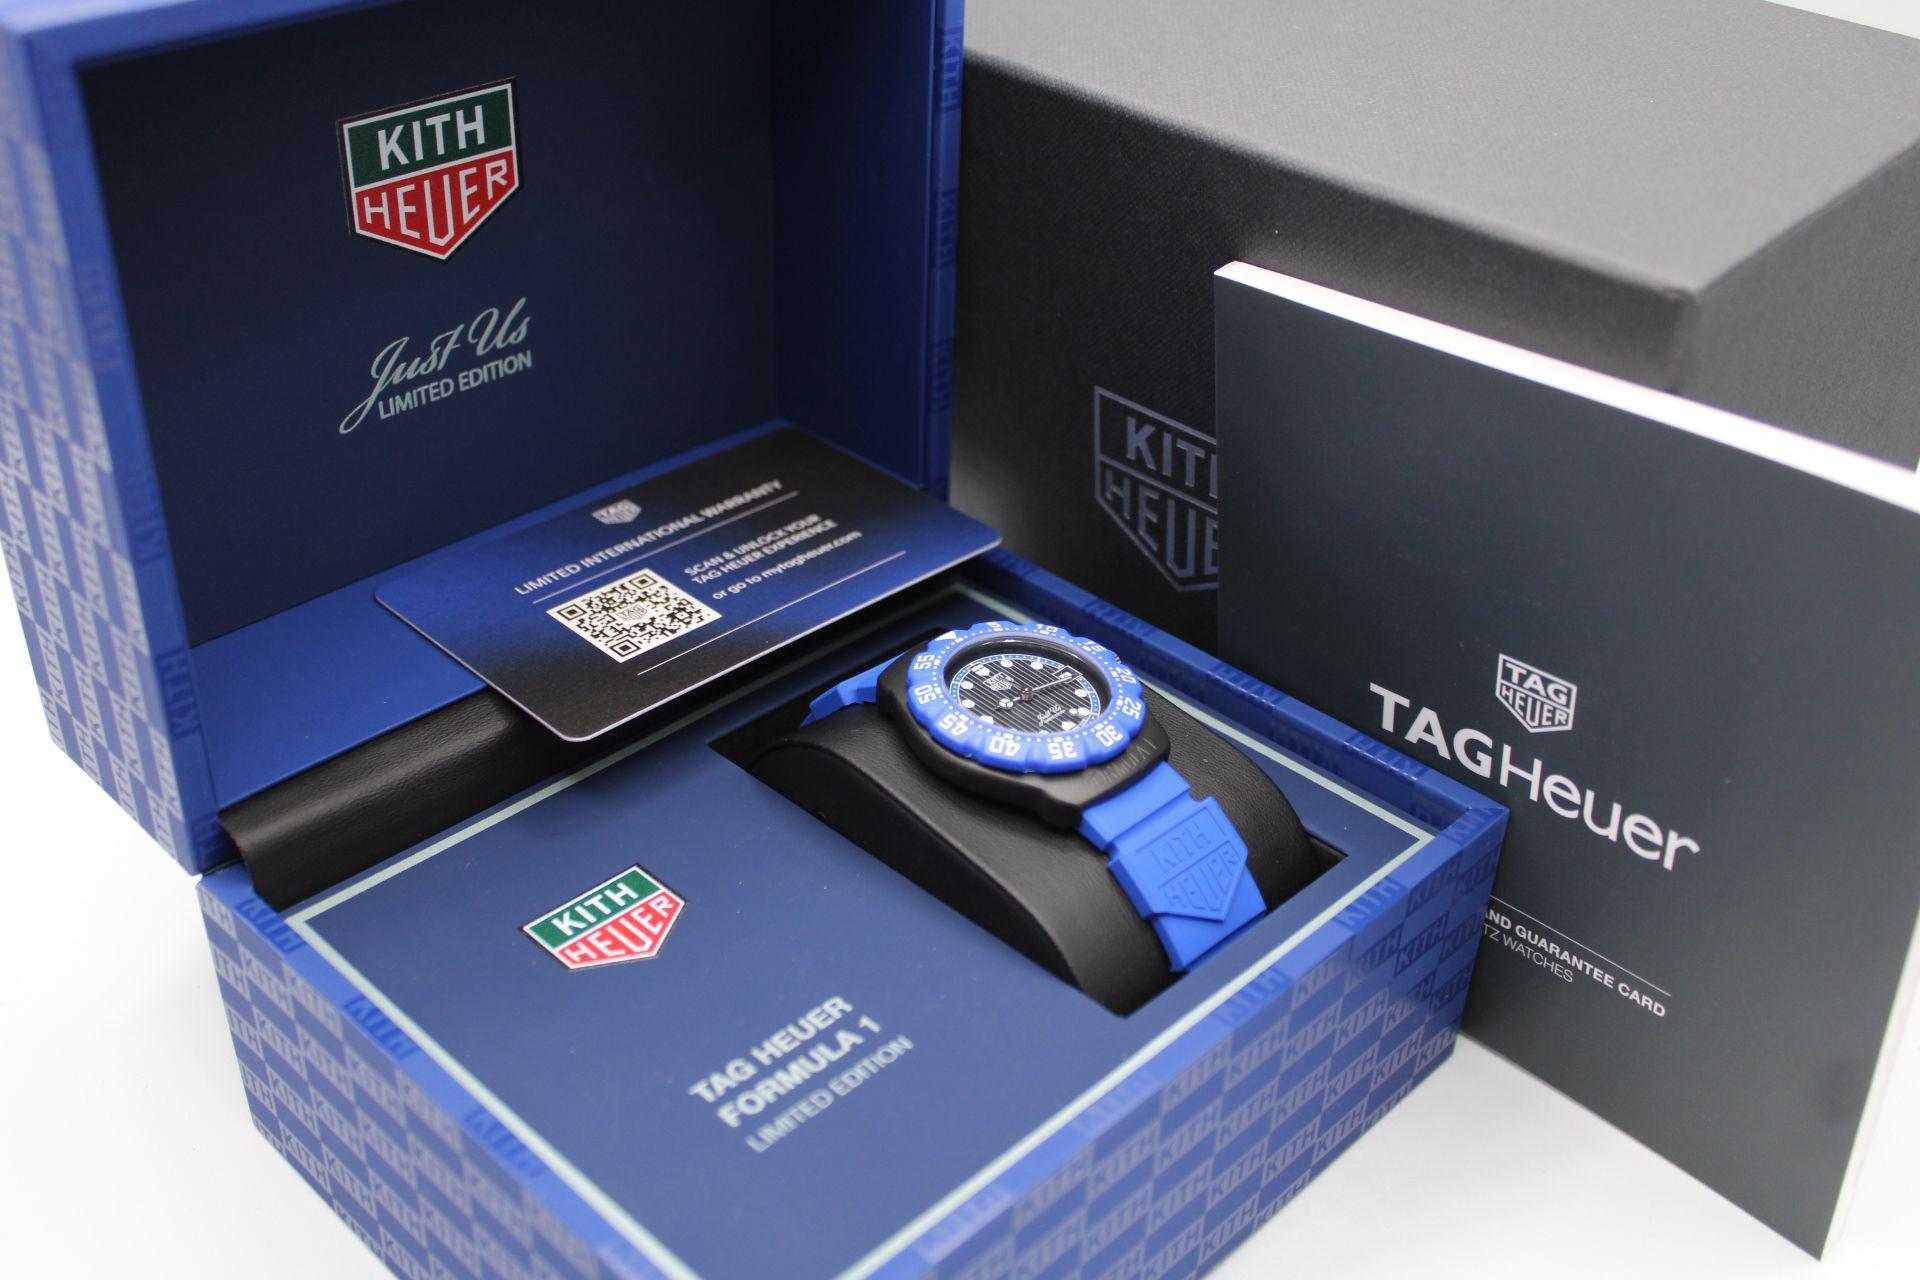 One of the hottest, newest watches on the market and limited to just 825 pieces of which this is one of and it's in the UK now ready for collection or next day delivery. 

Introducing the Tag Heuer x Kith Limited Edtion Formula 1 Blue version.